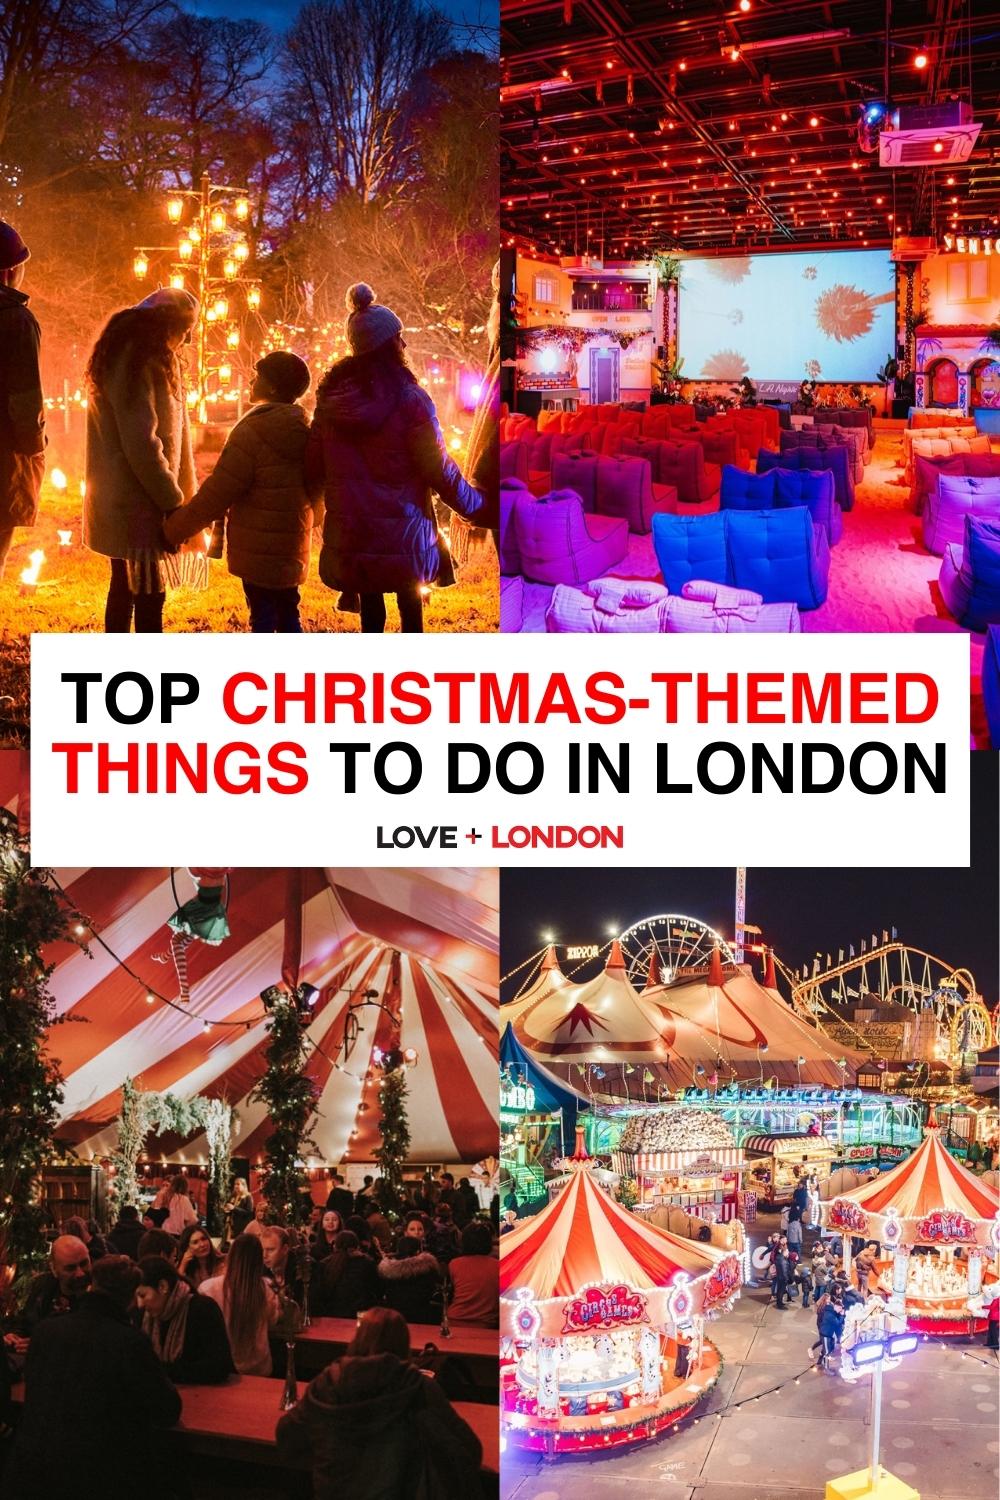 Top Christmas-Themed Things to Do in London